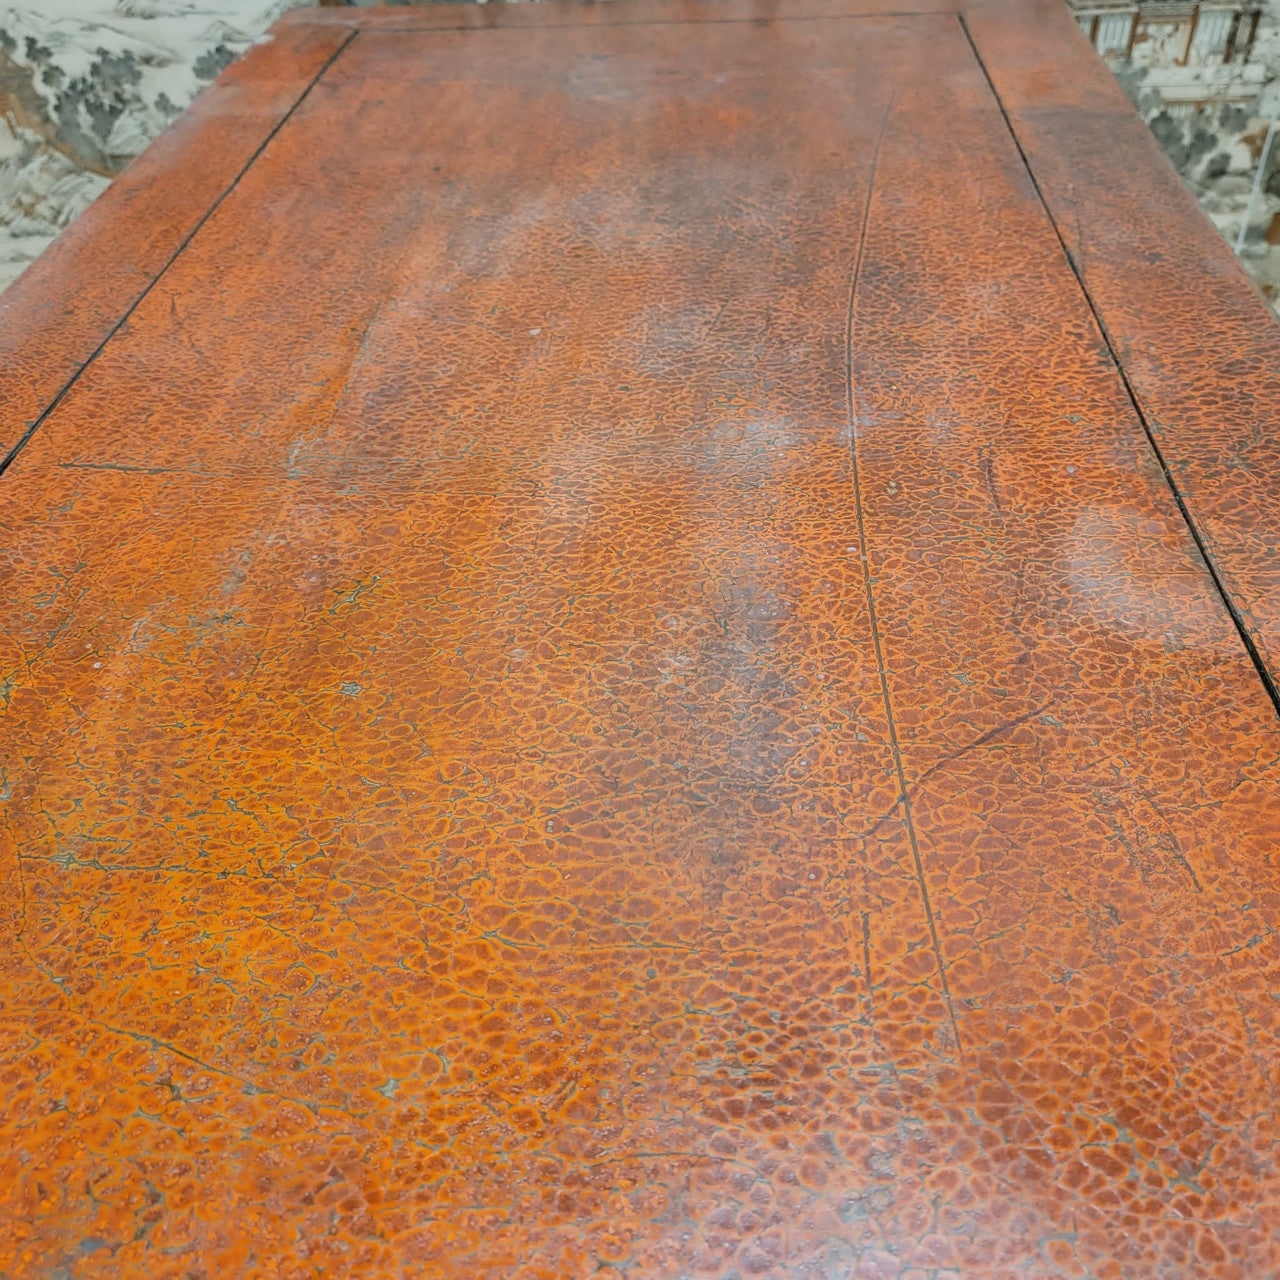 Antique Shanxi Province Red Lacquer Elm Coffee Table